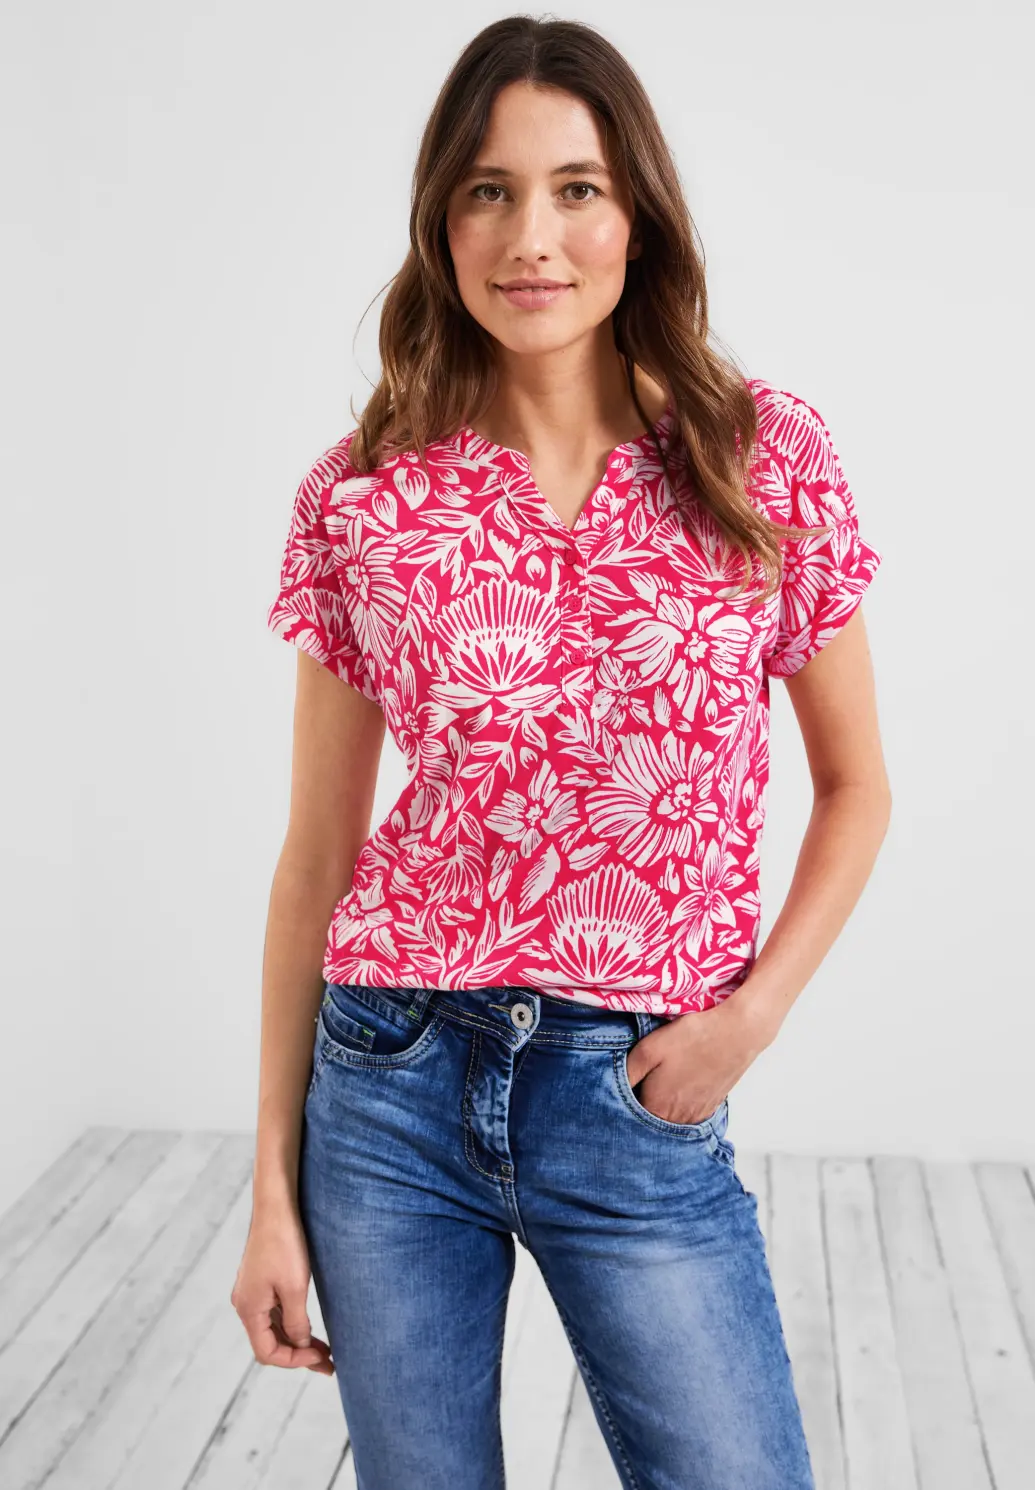 CECIL T-Shirt mit Blumenmuster - Strawberry Red / Rot | - Cotton Blues